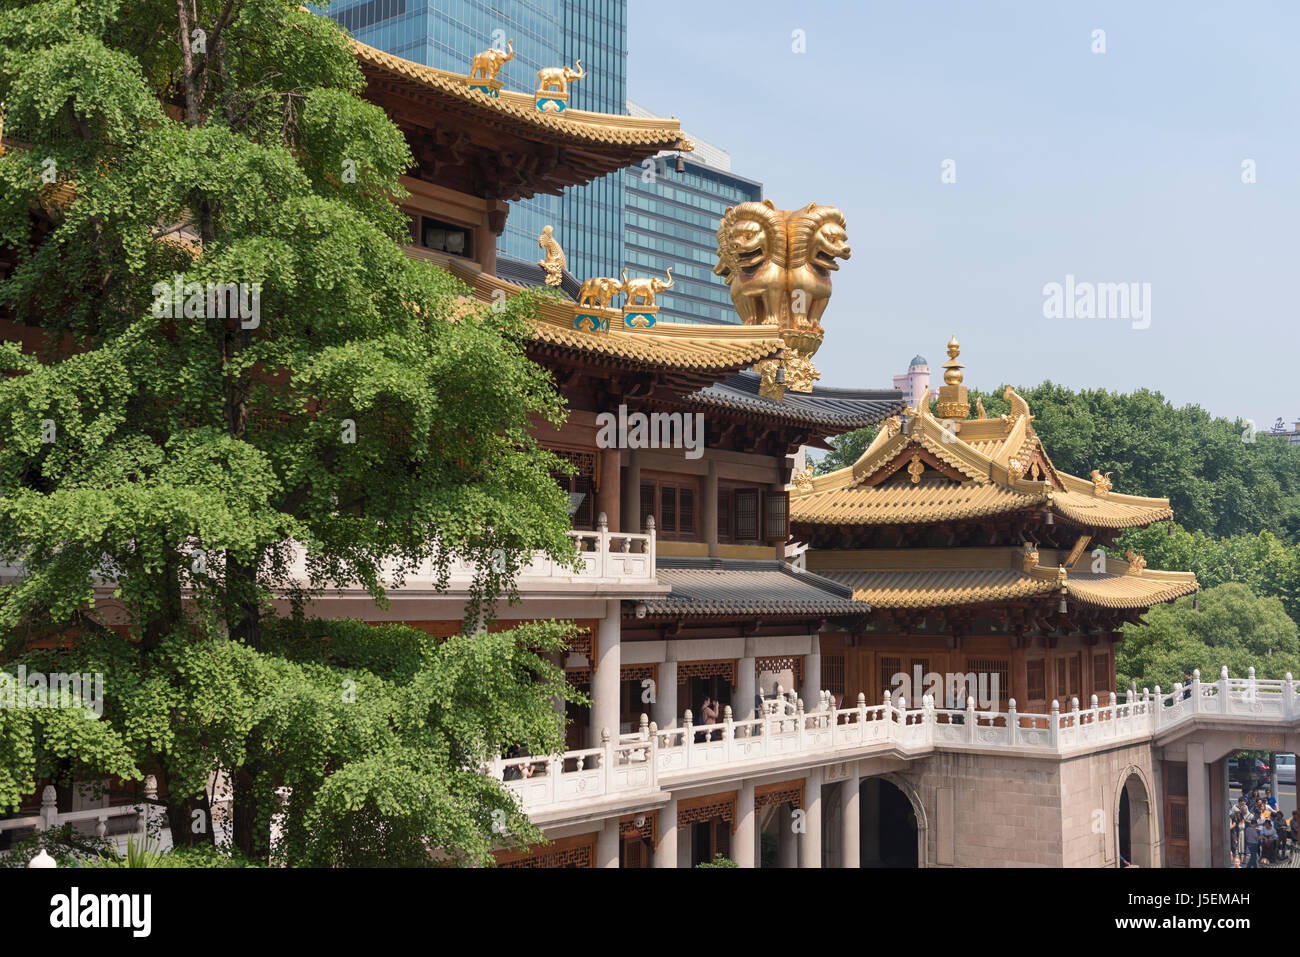 Jing'An buddhist temple in Shanghai, China with ornate buildings and gold lion guardian statue Stock Photo